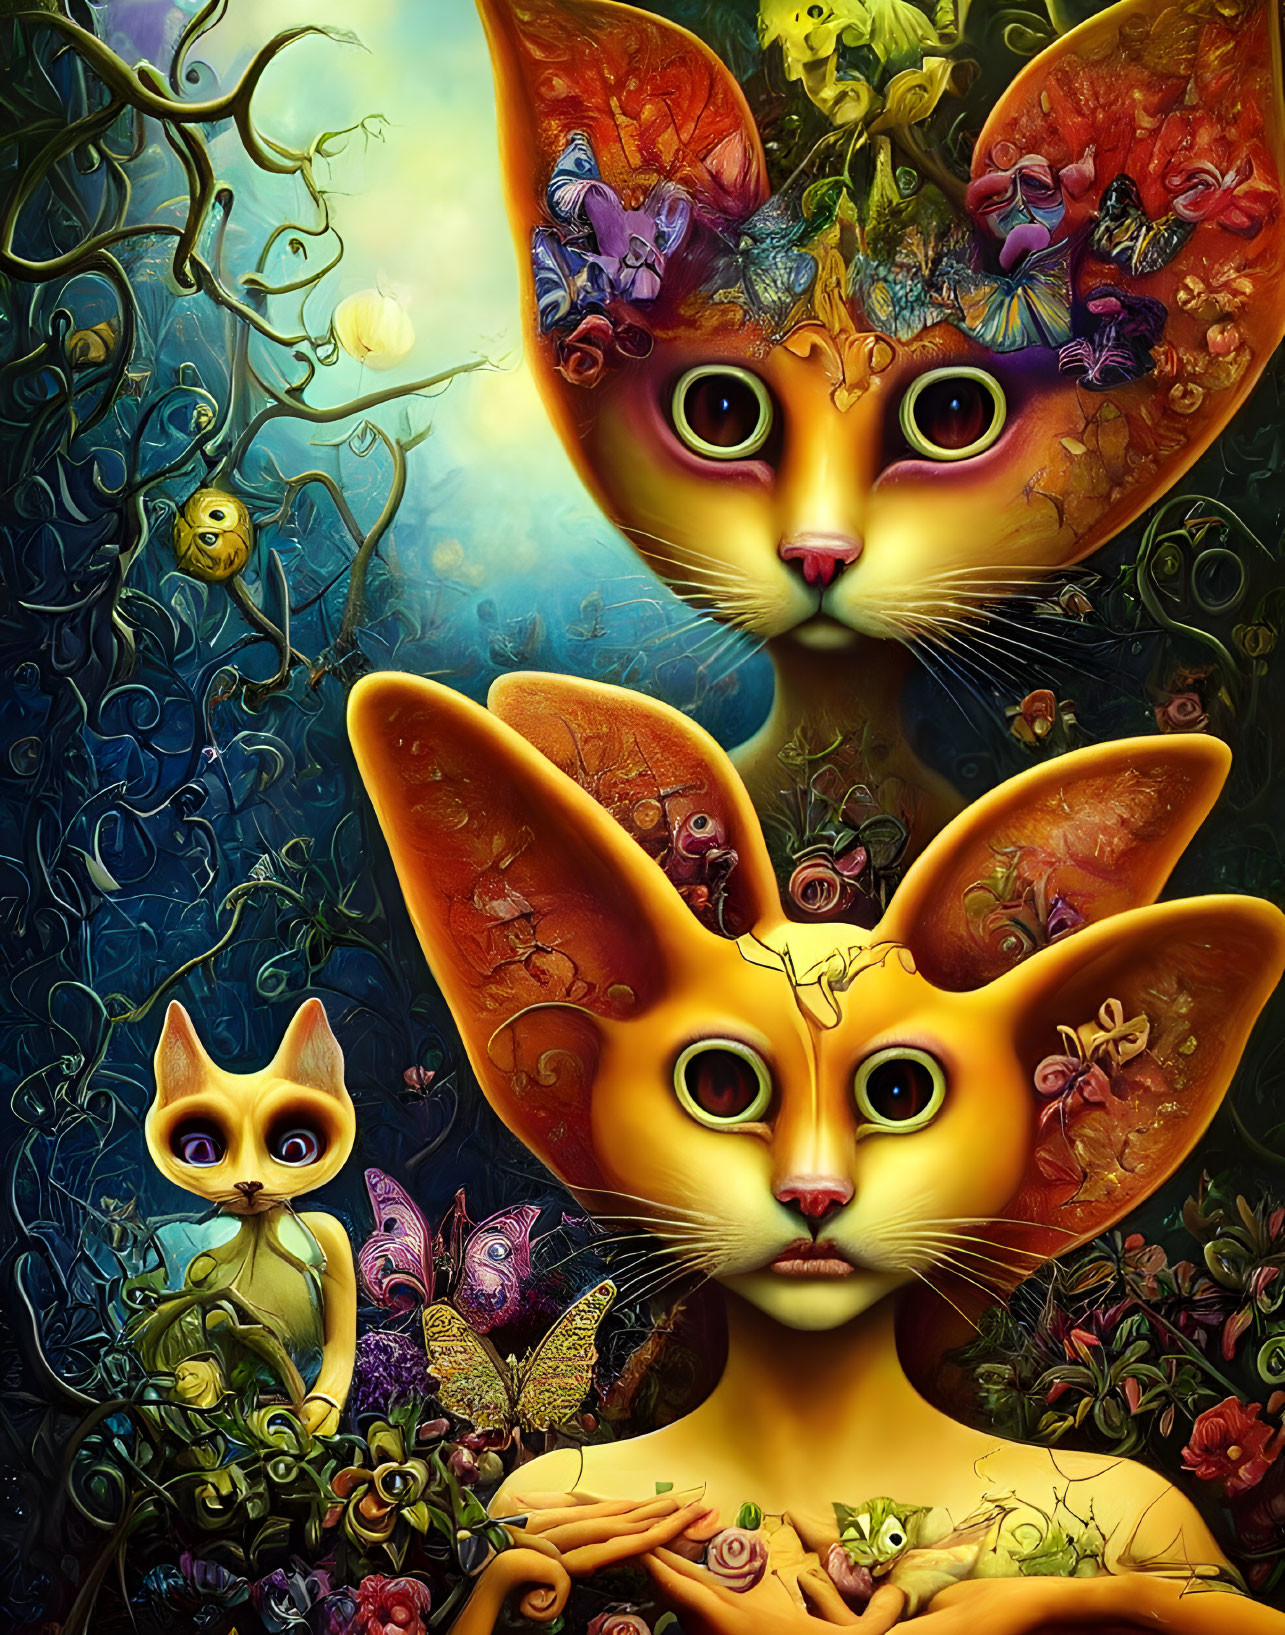 Whimsical artwork: Three stylized cats with floral patterns in vibrant fantasy backdrop